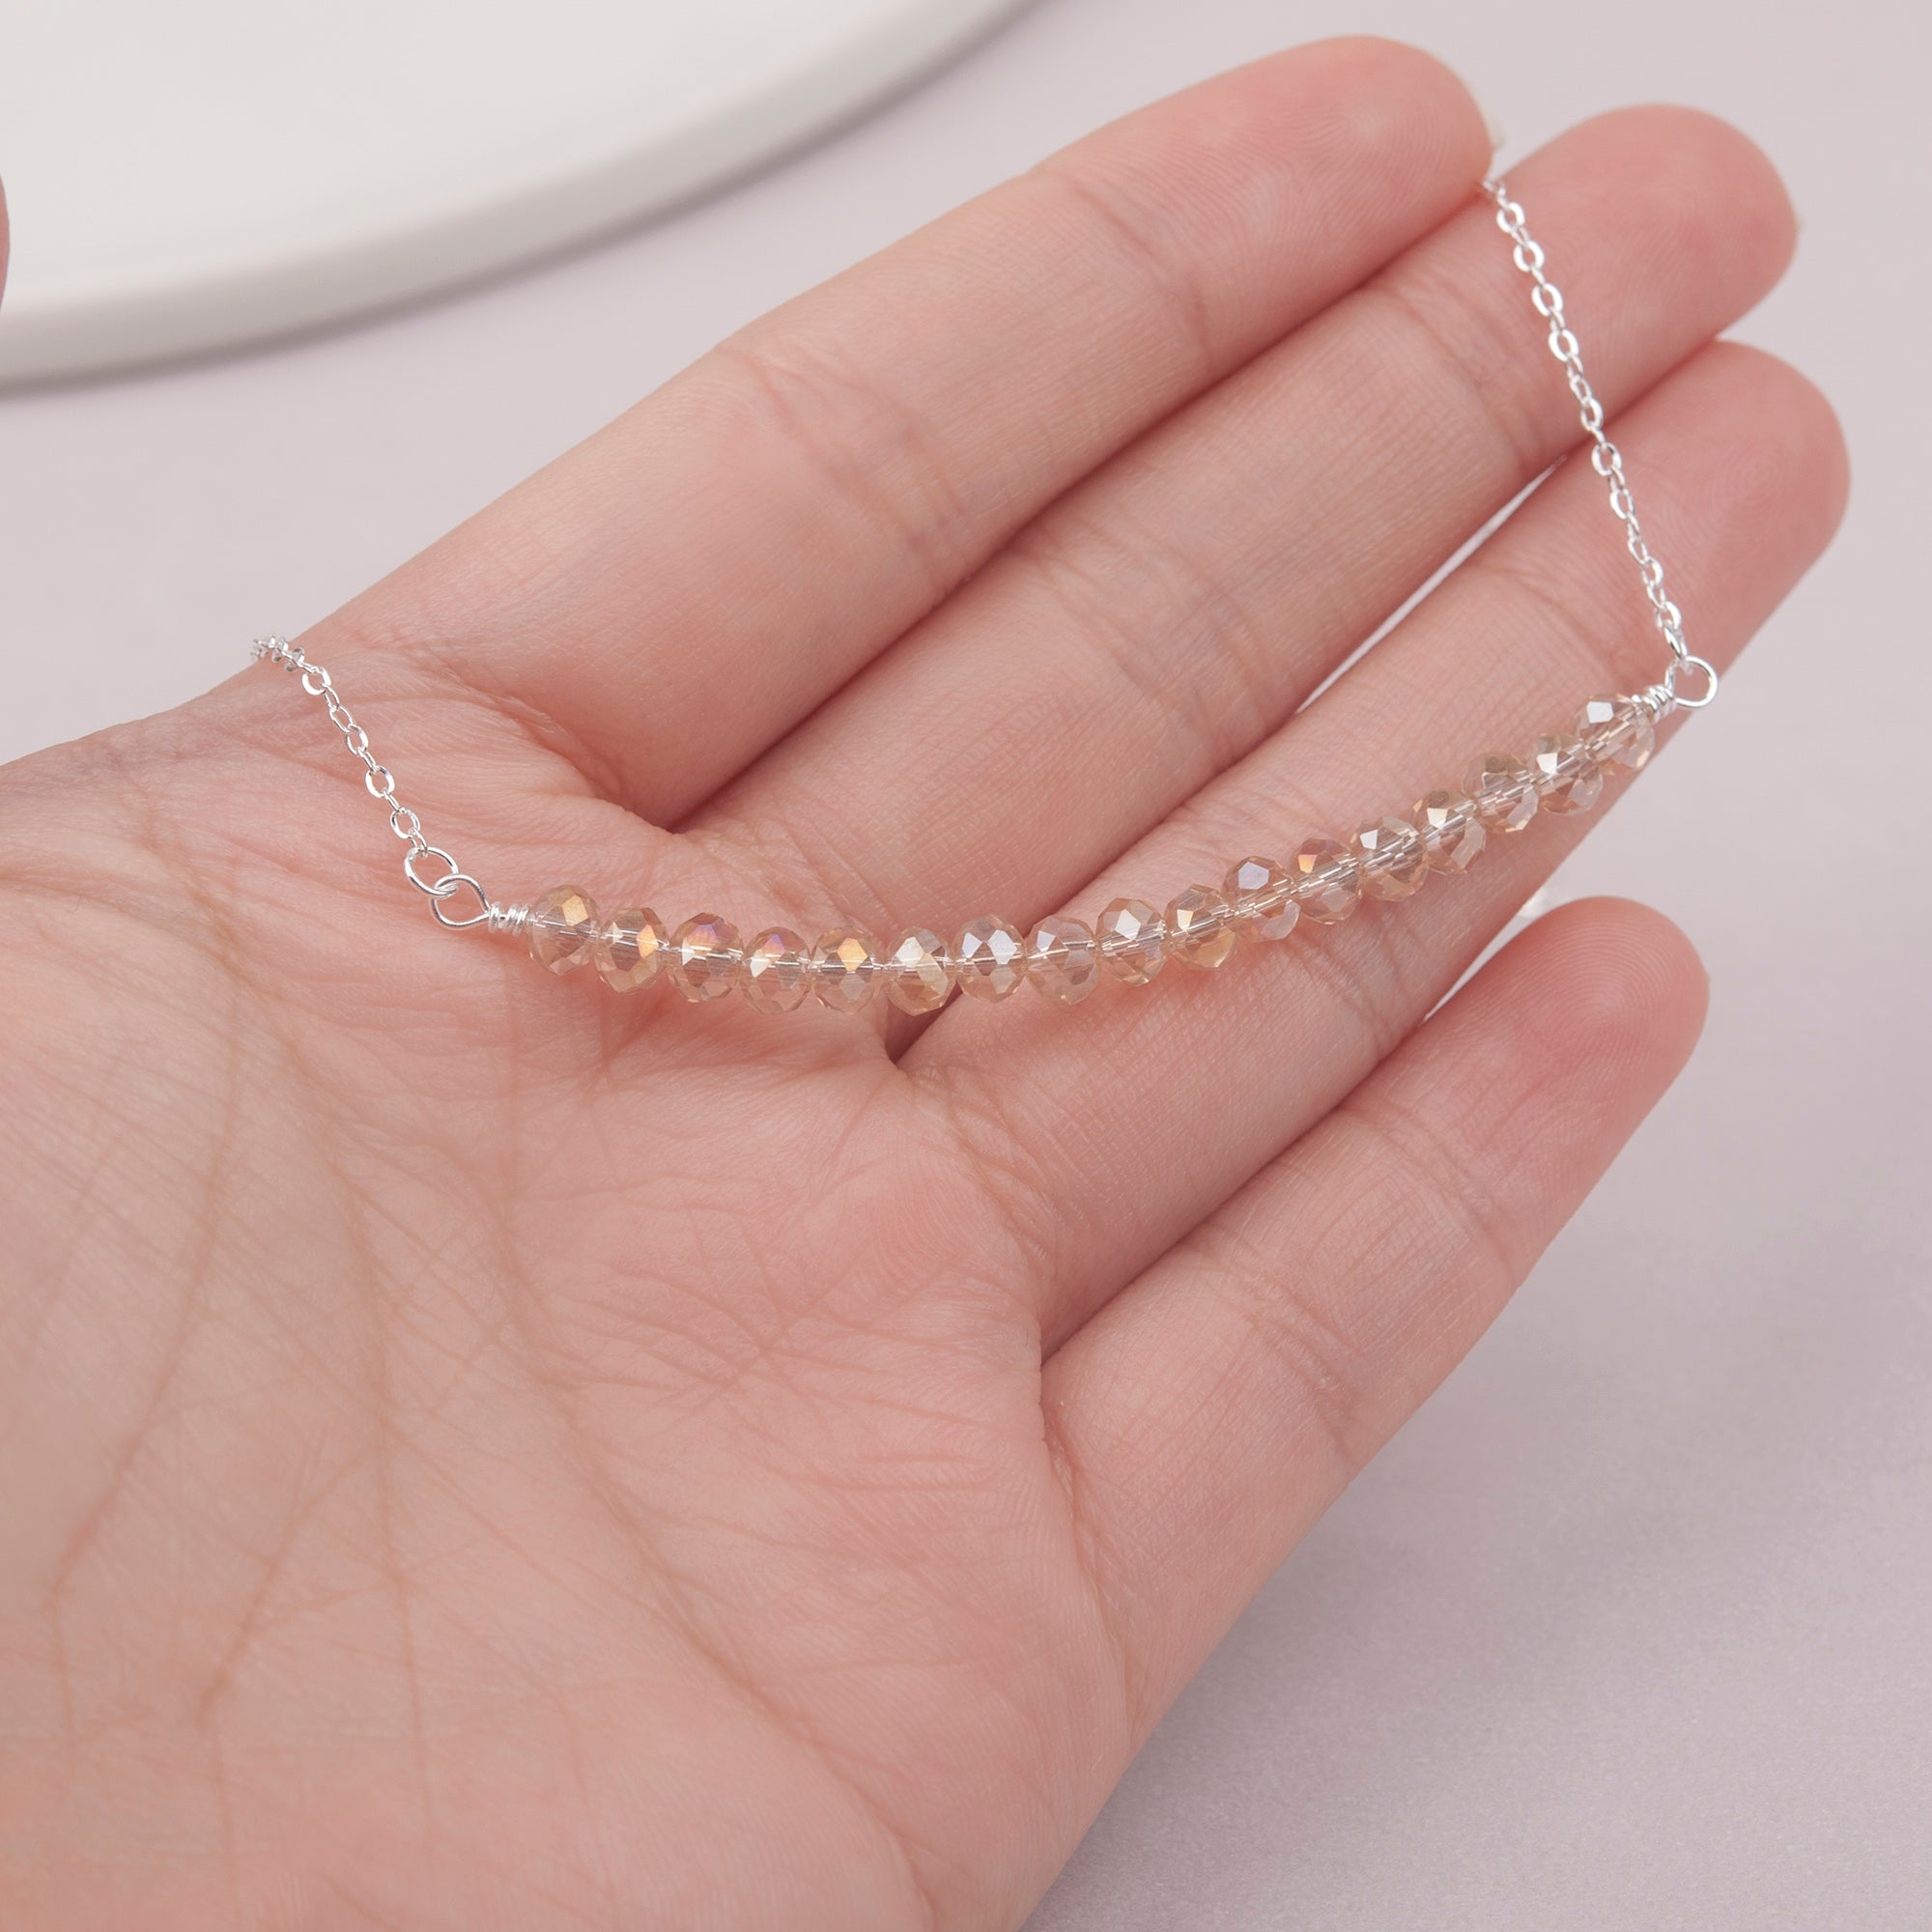 17th Birthday Gifts for Girls, Sterling Silver 17 Crystal Beads Necklace Gift for 17 Year Old Girl, Birthday Milestone Necklace